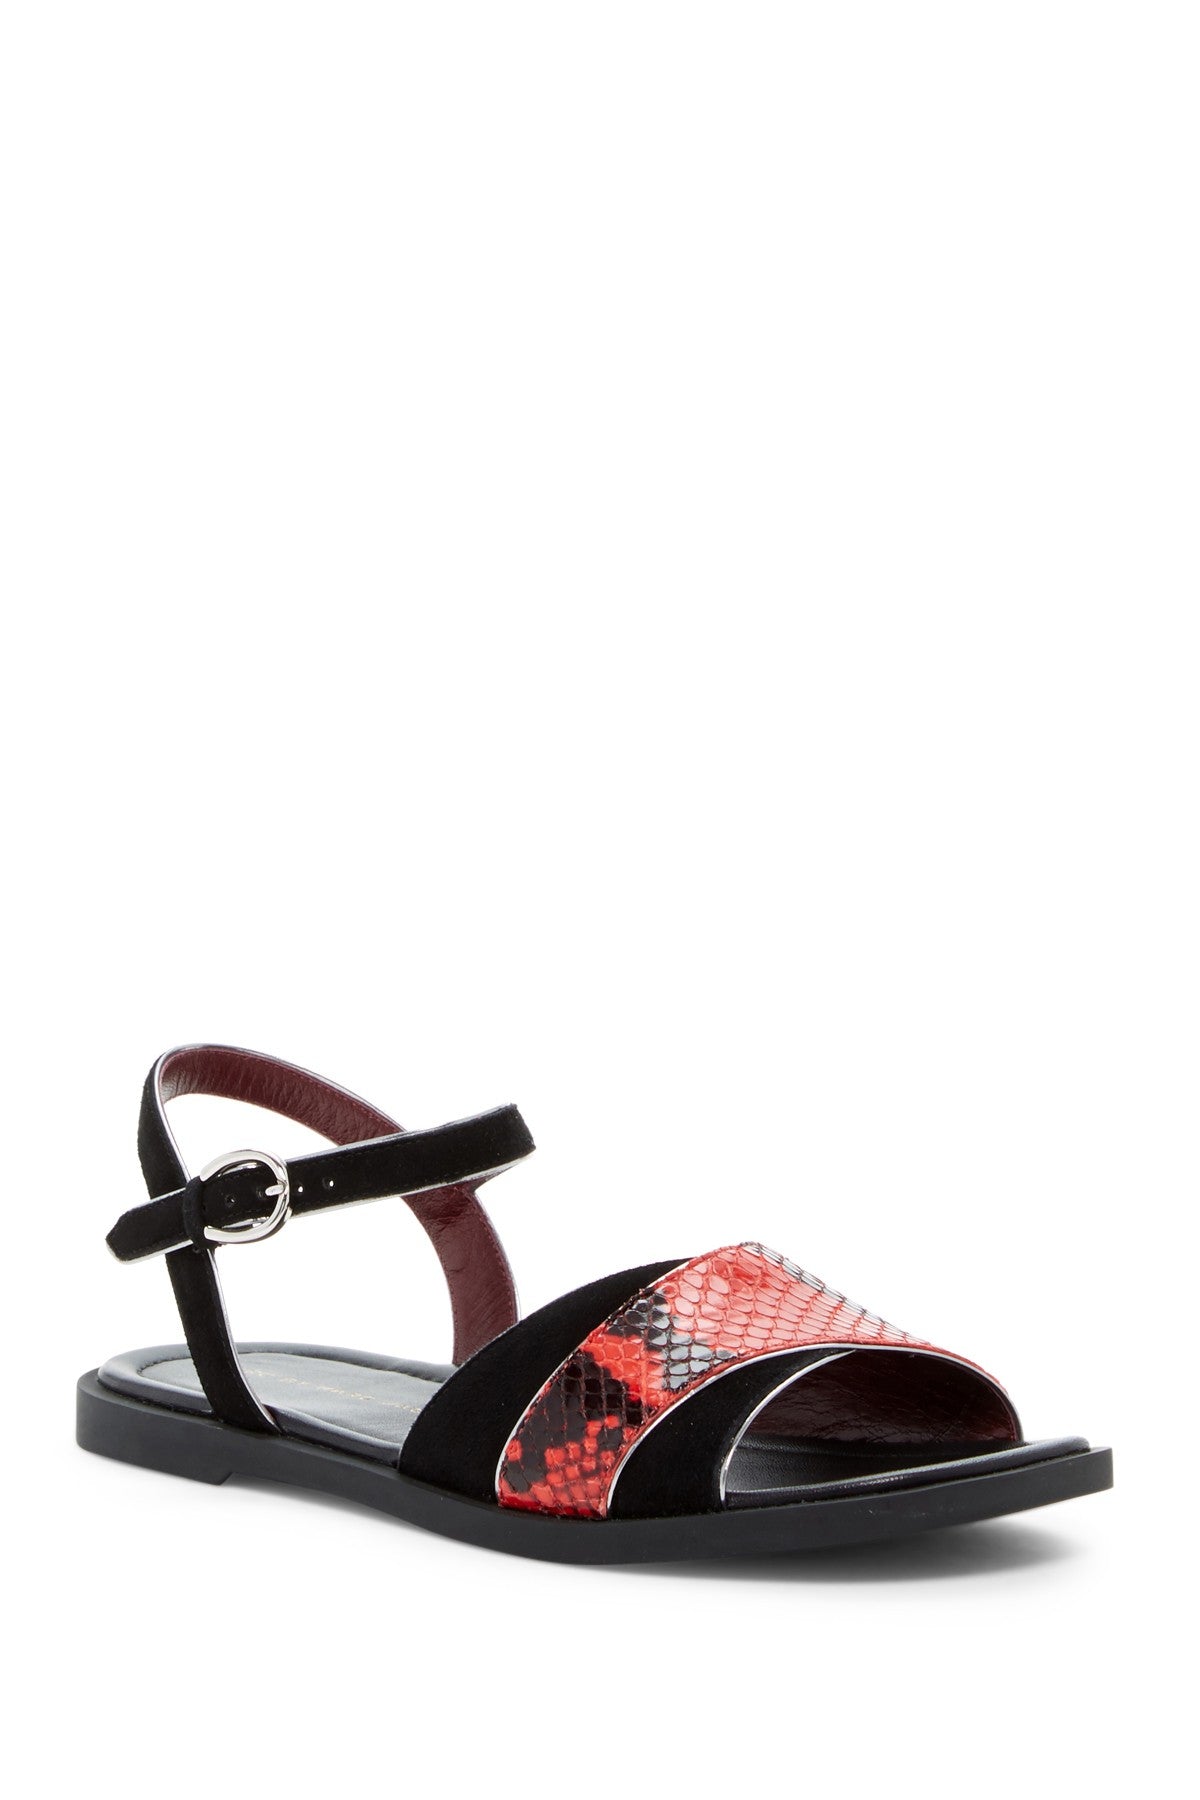 Marc by Marc Jacobs Womens M9000661 Jodie Red Black Marc Jacobs Sandal